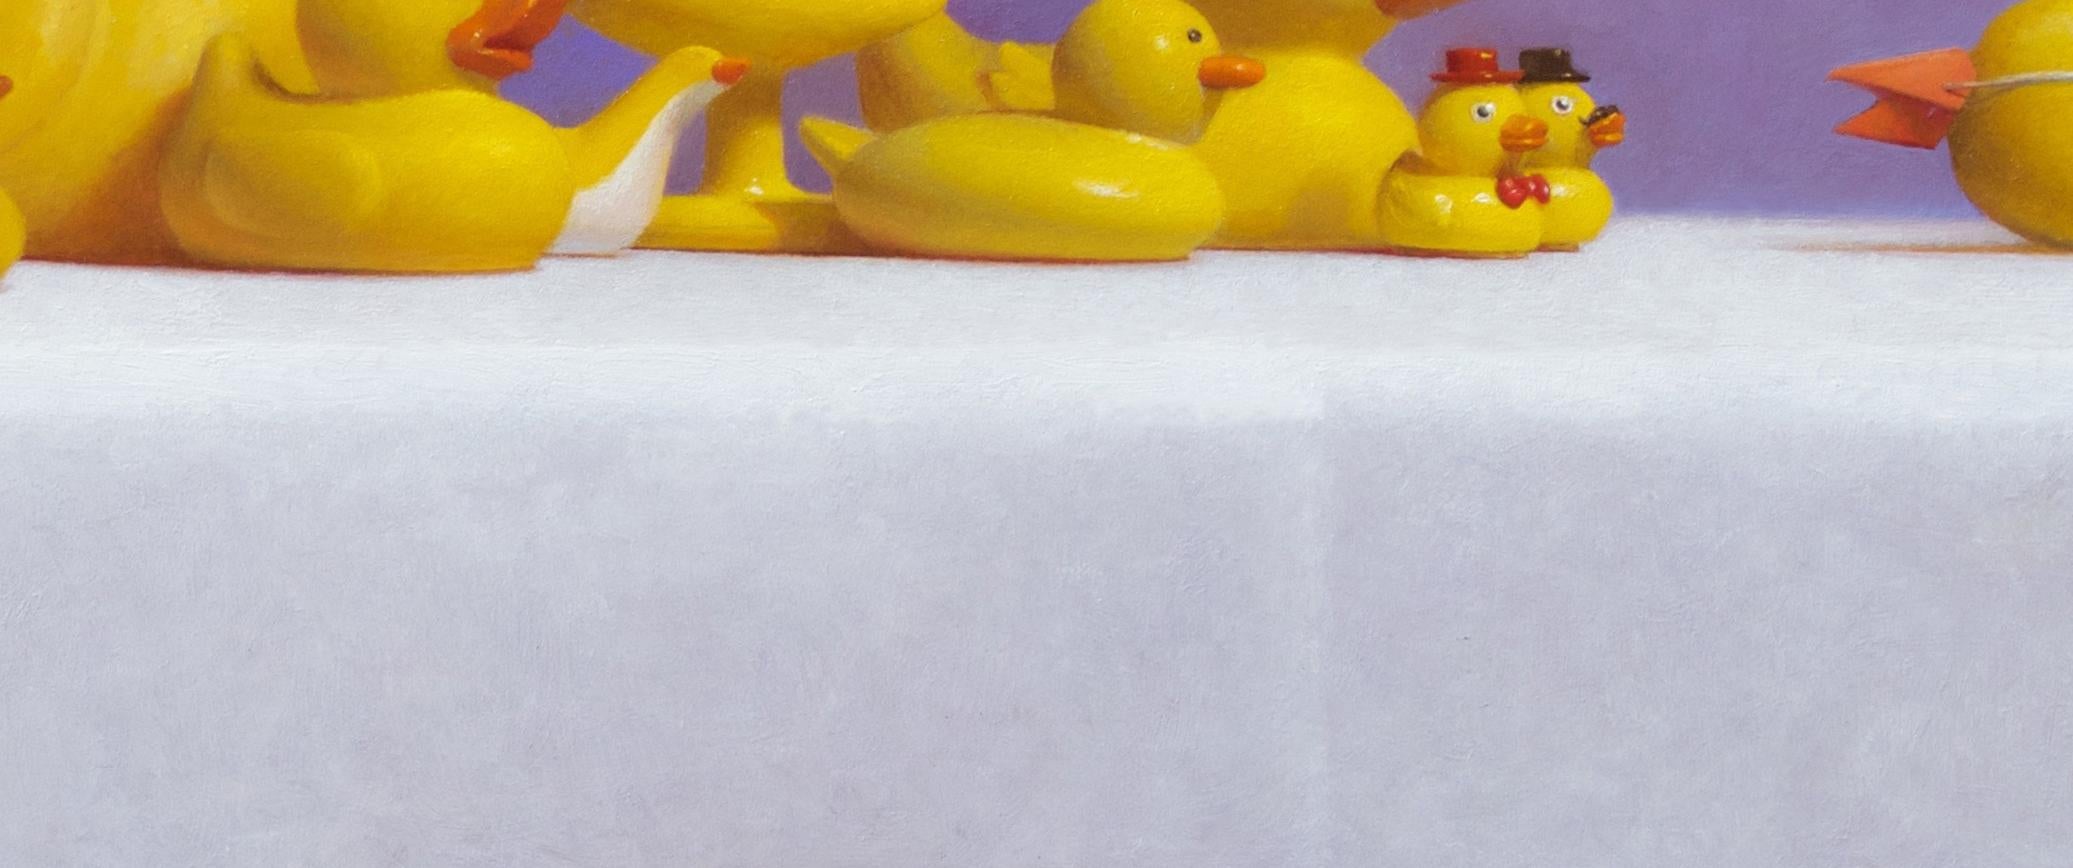 rubber duck painting